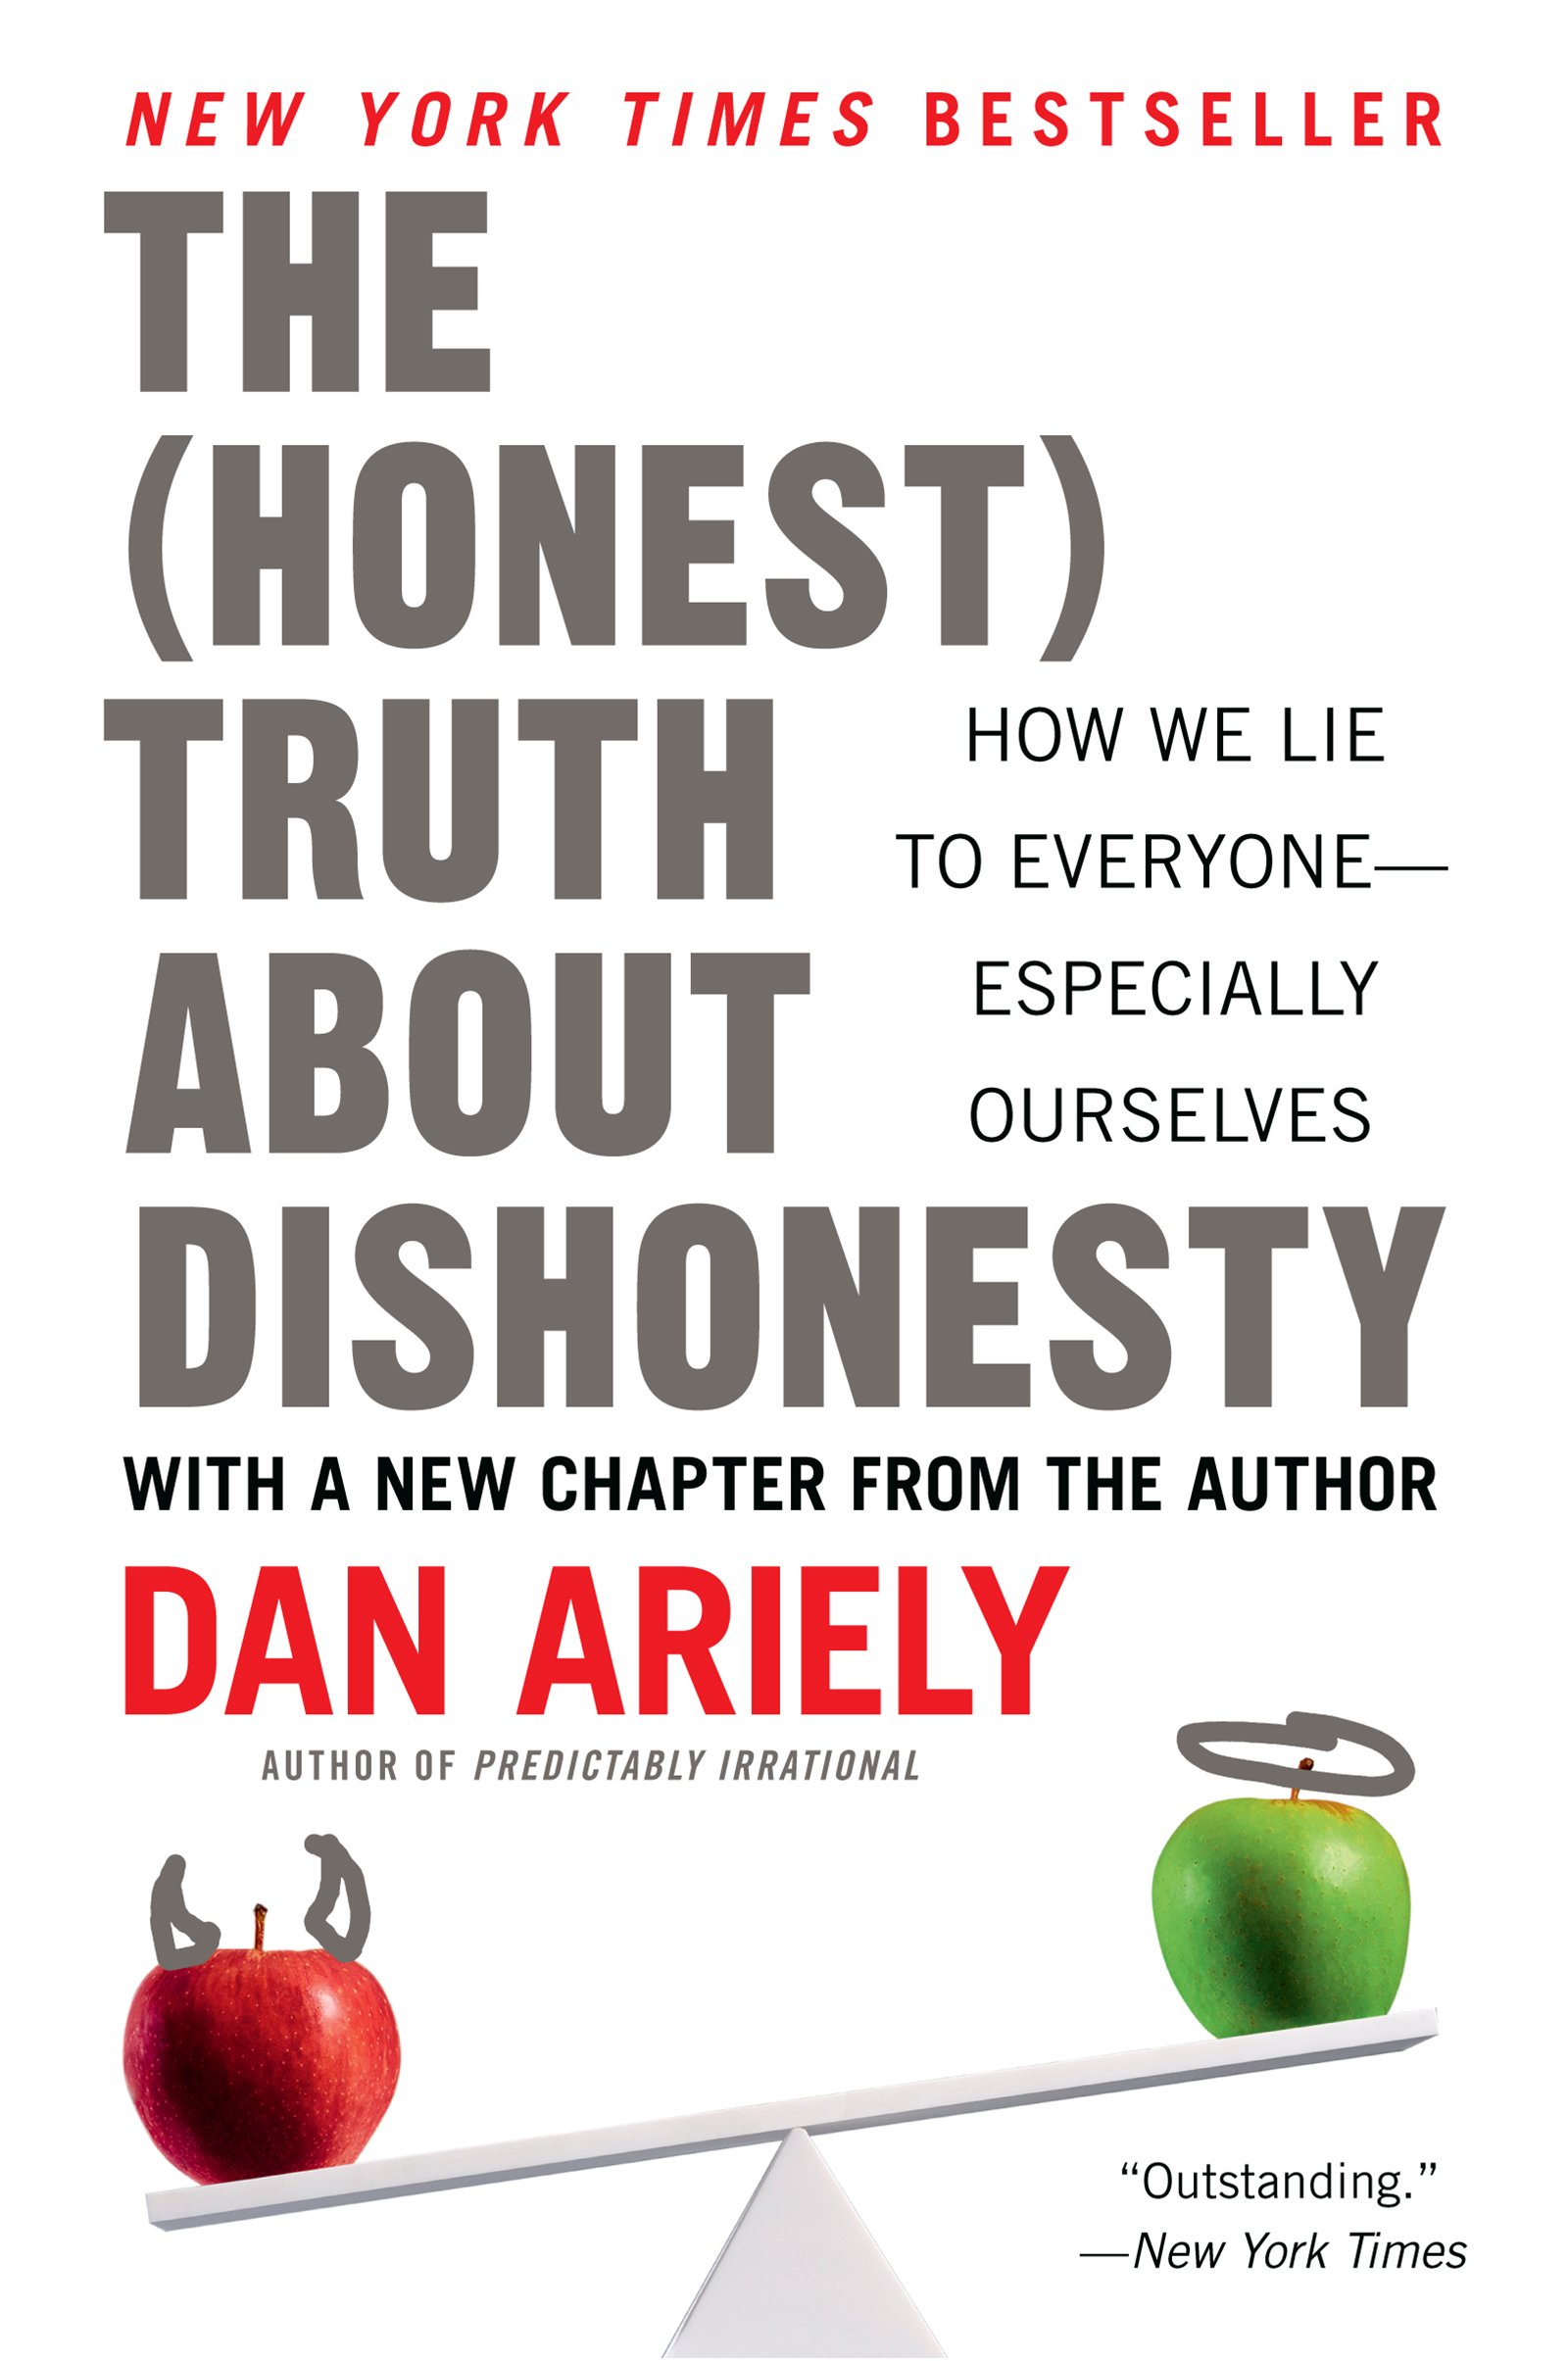 Front cover of The (Honest) Truth About Dishonesty book by Dan Ariely